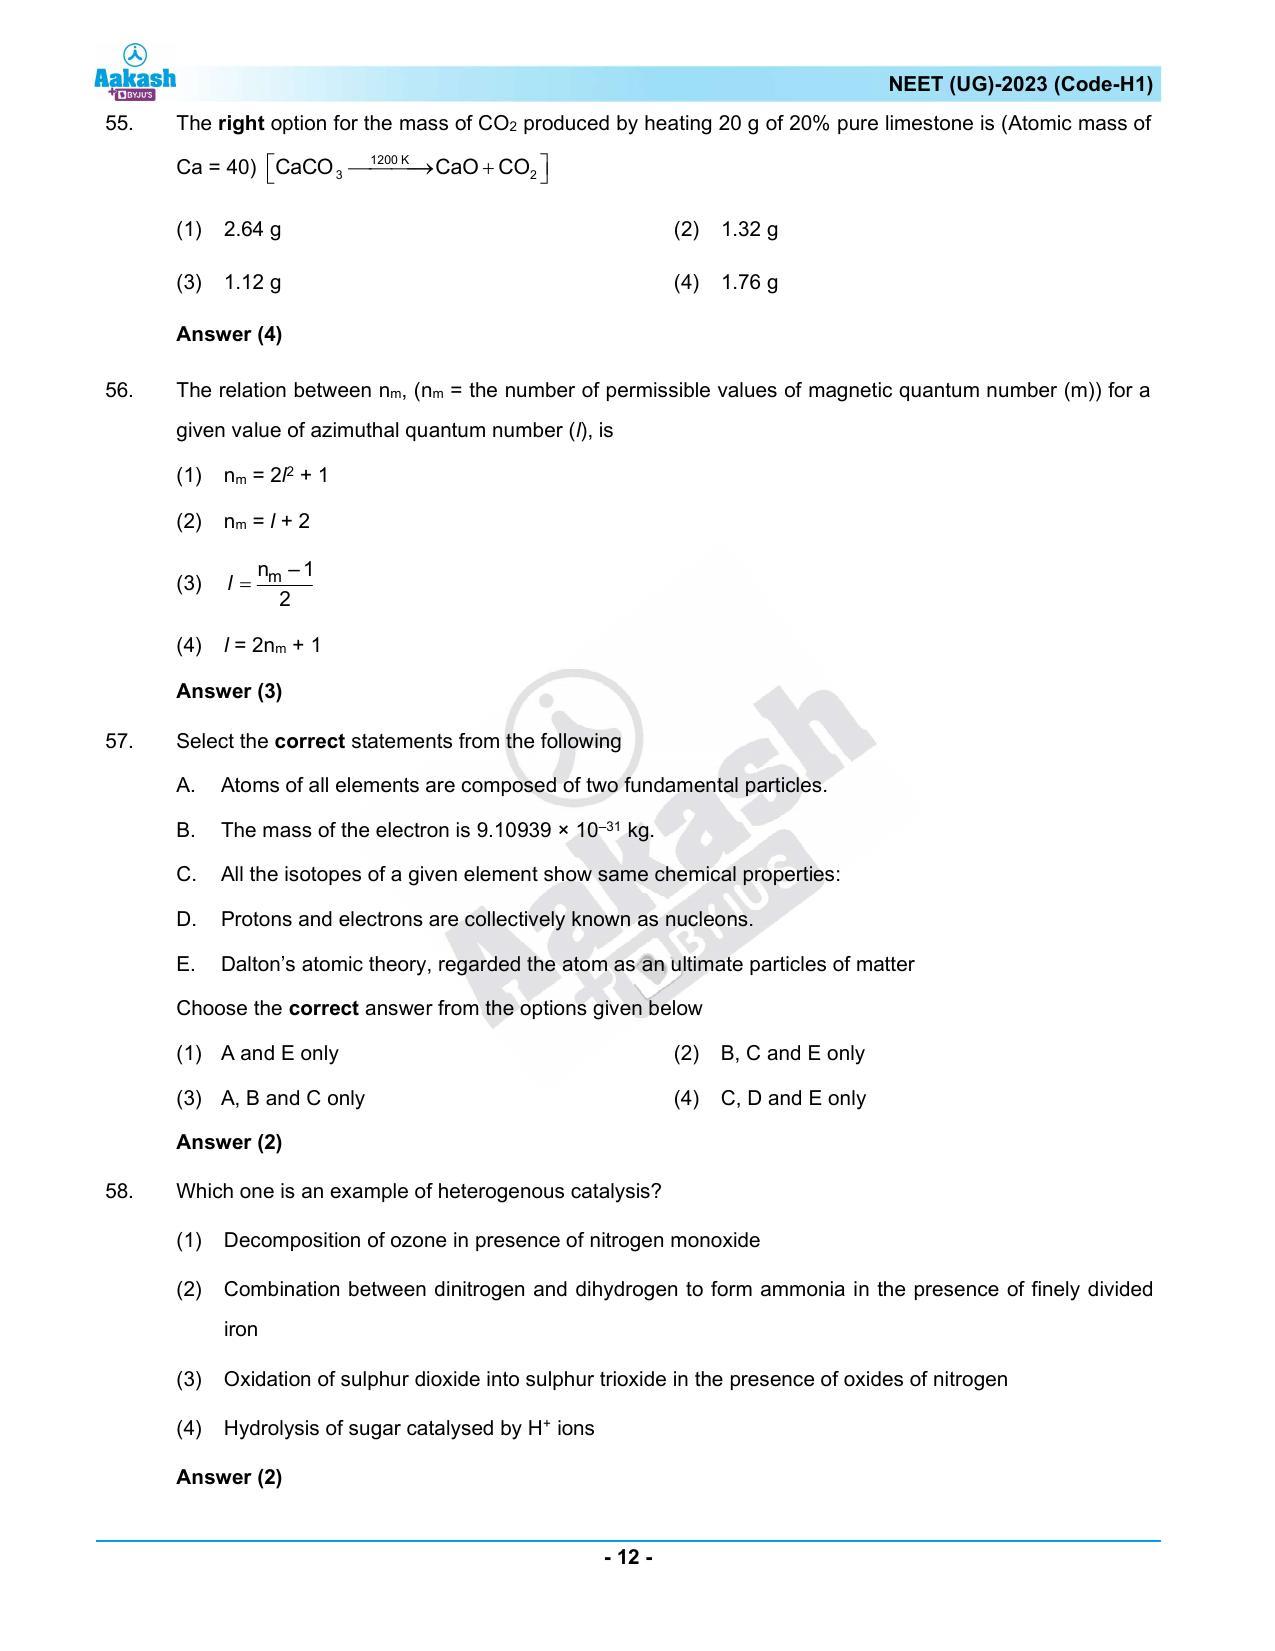 NEET 2023 Question Paper H1 - Page 12